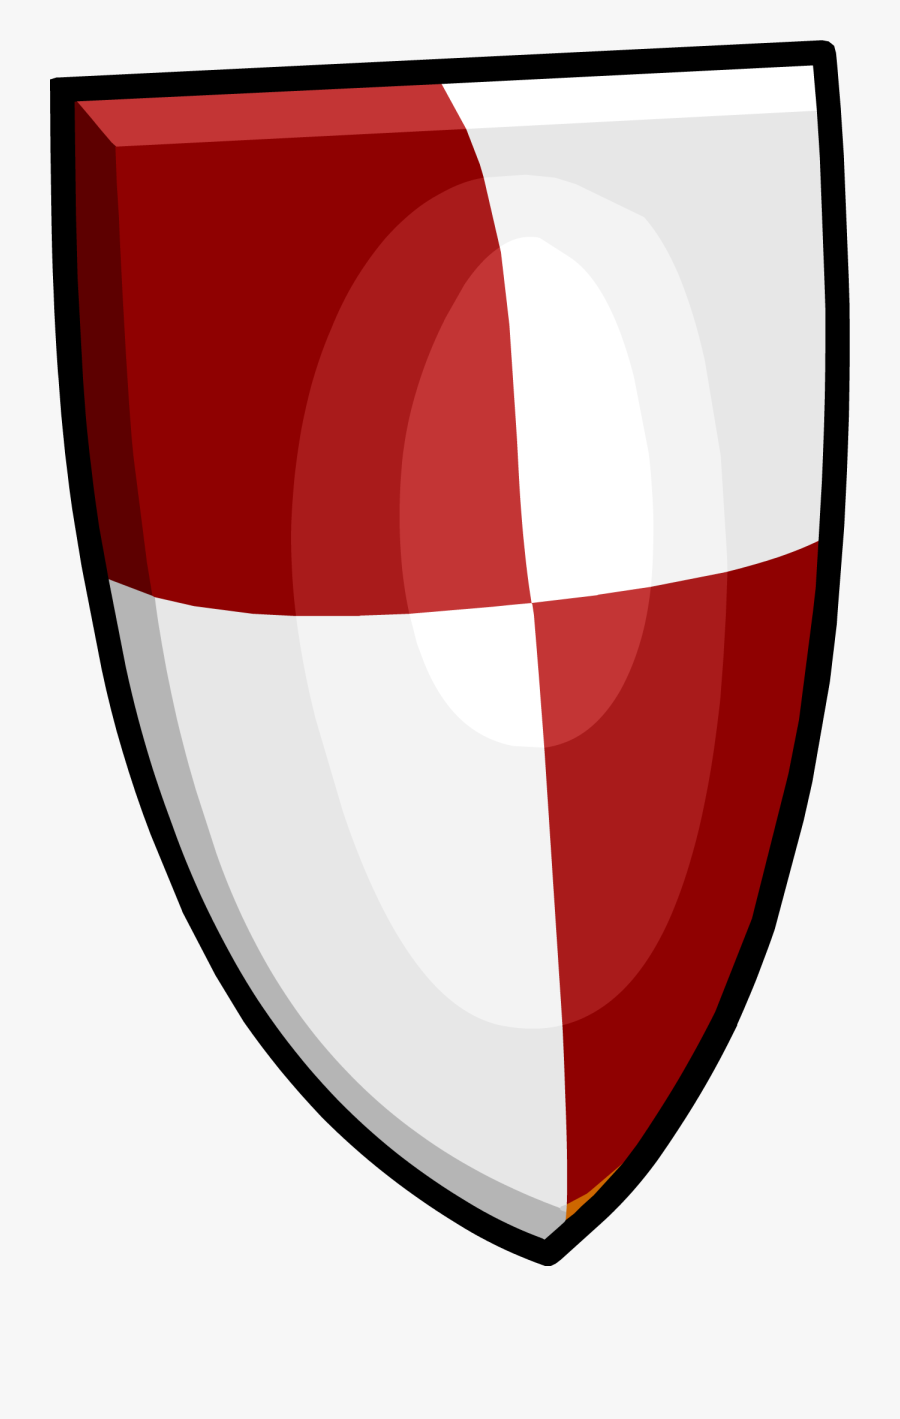 Image Png Club Penguin - Shield Red Png, Transparent Clipart